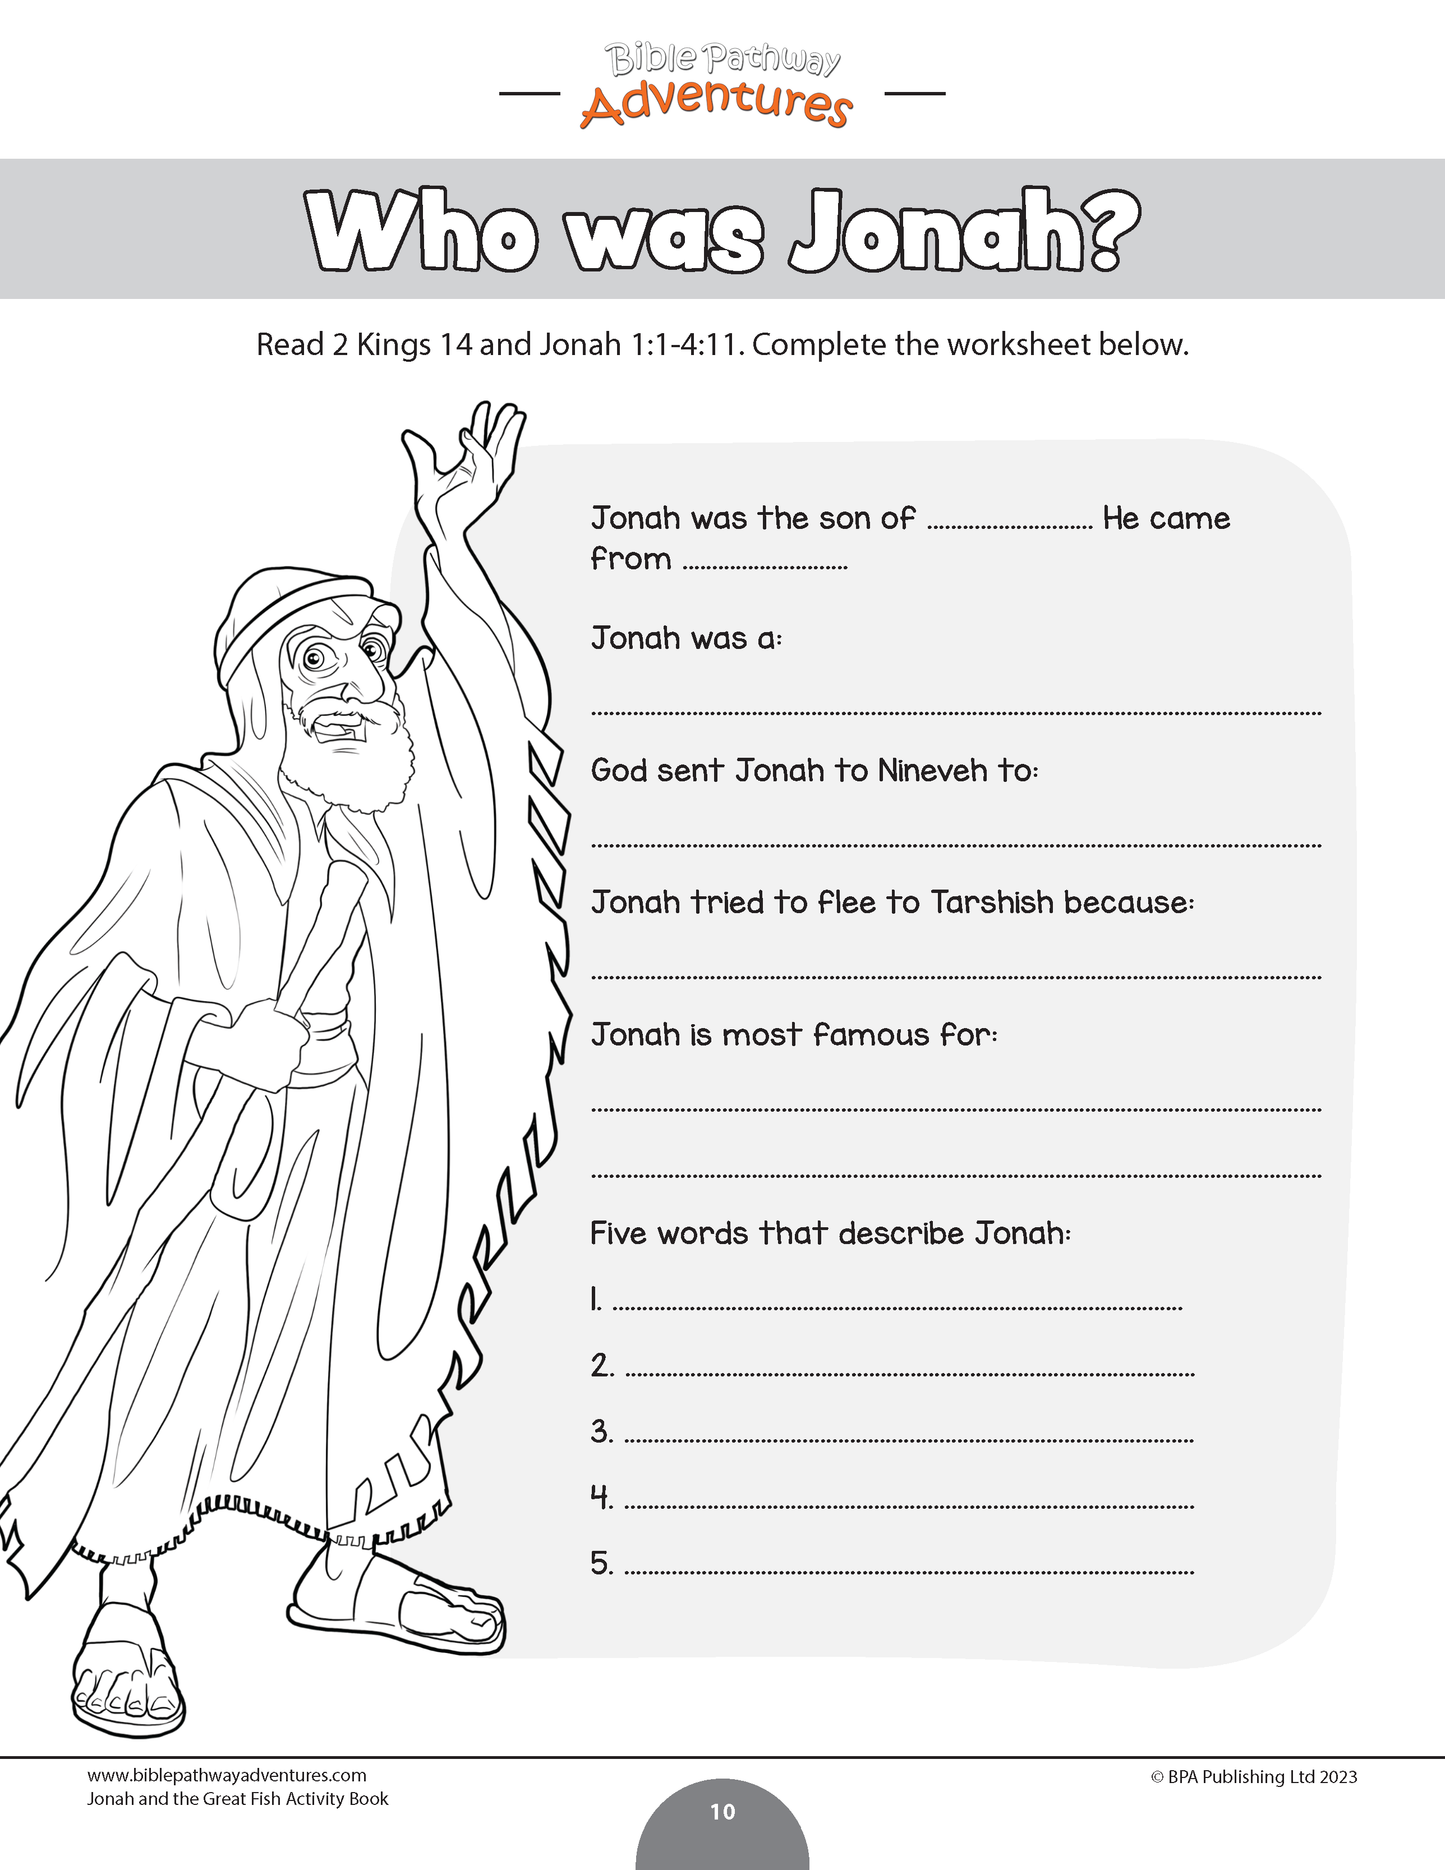 Jonah and the Great Fish Activity Book